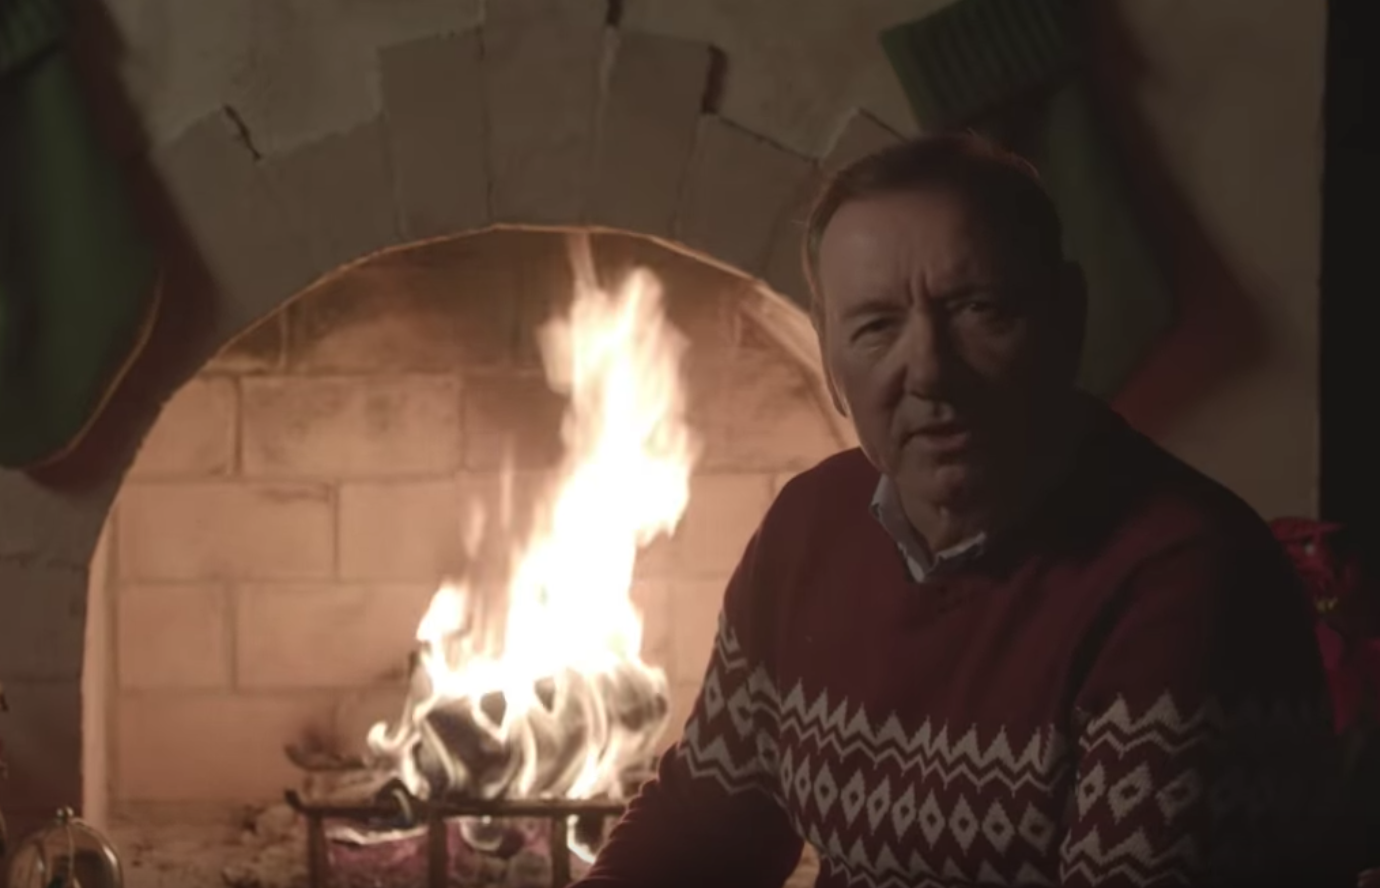 Kevin Spacey Breaks Silence in Strange Video, Faces Charge for Alleged Sexual Assault